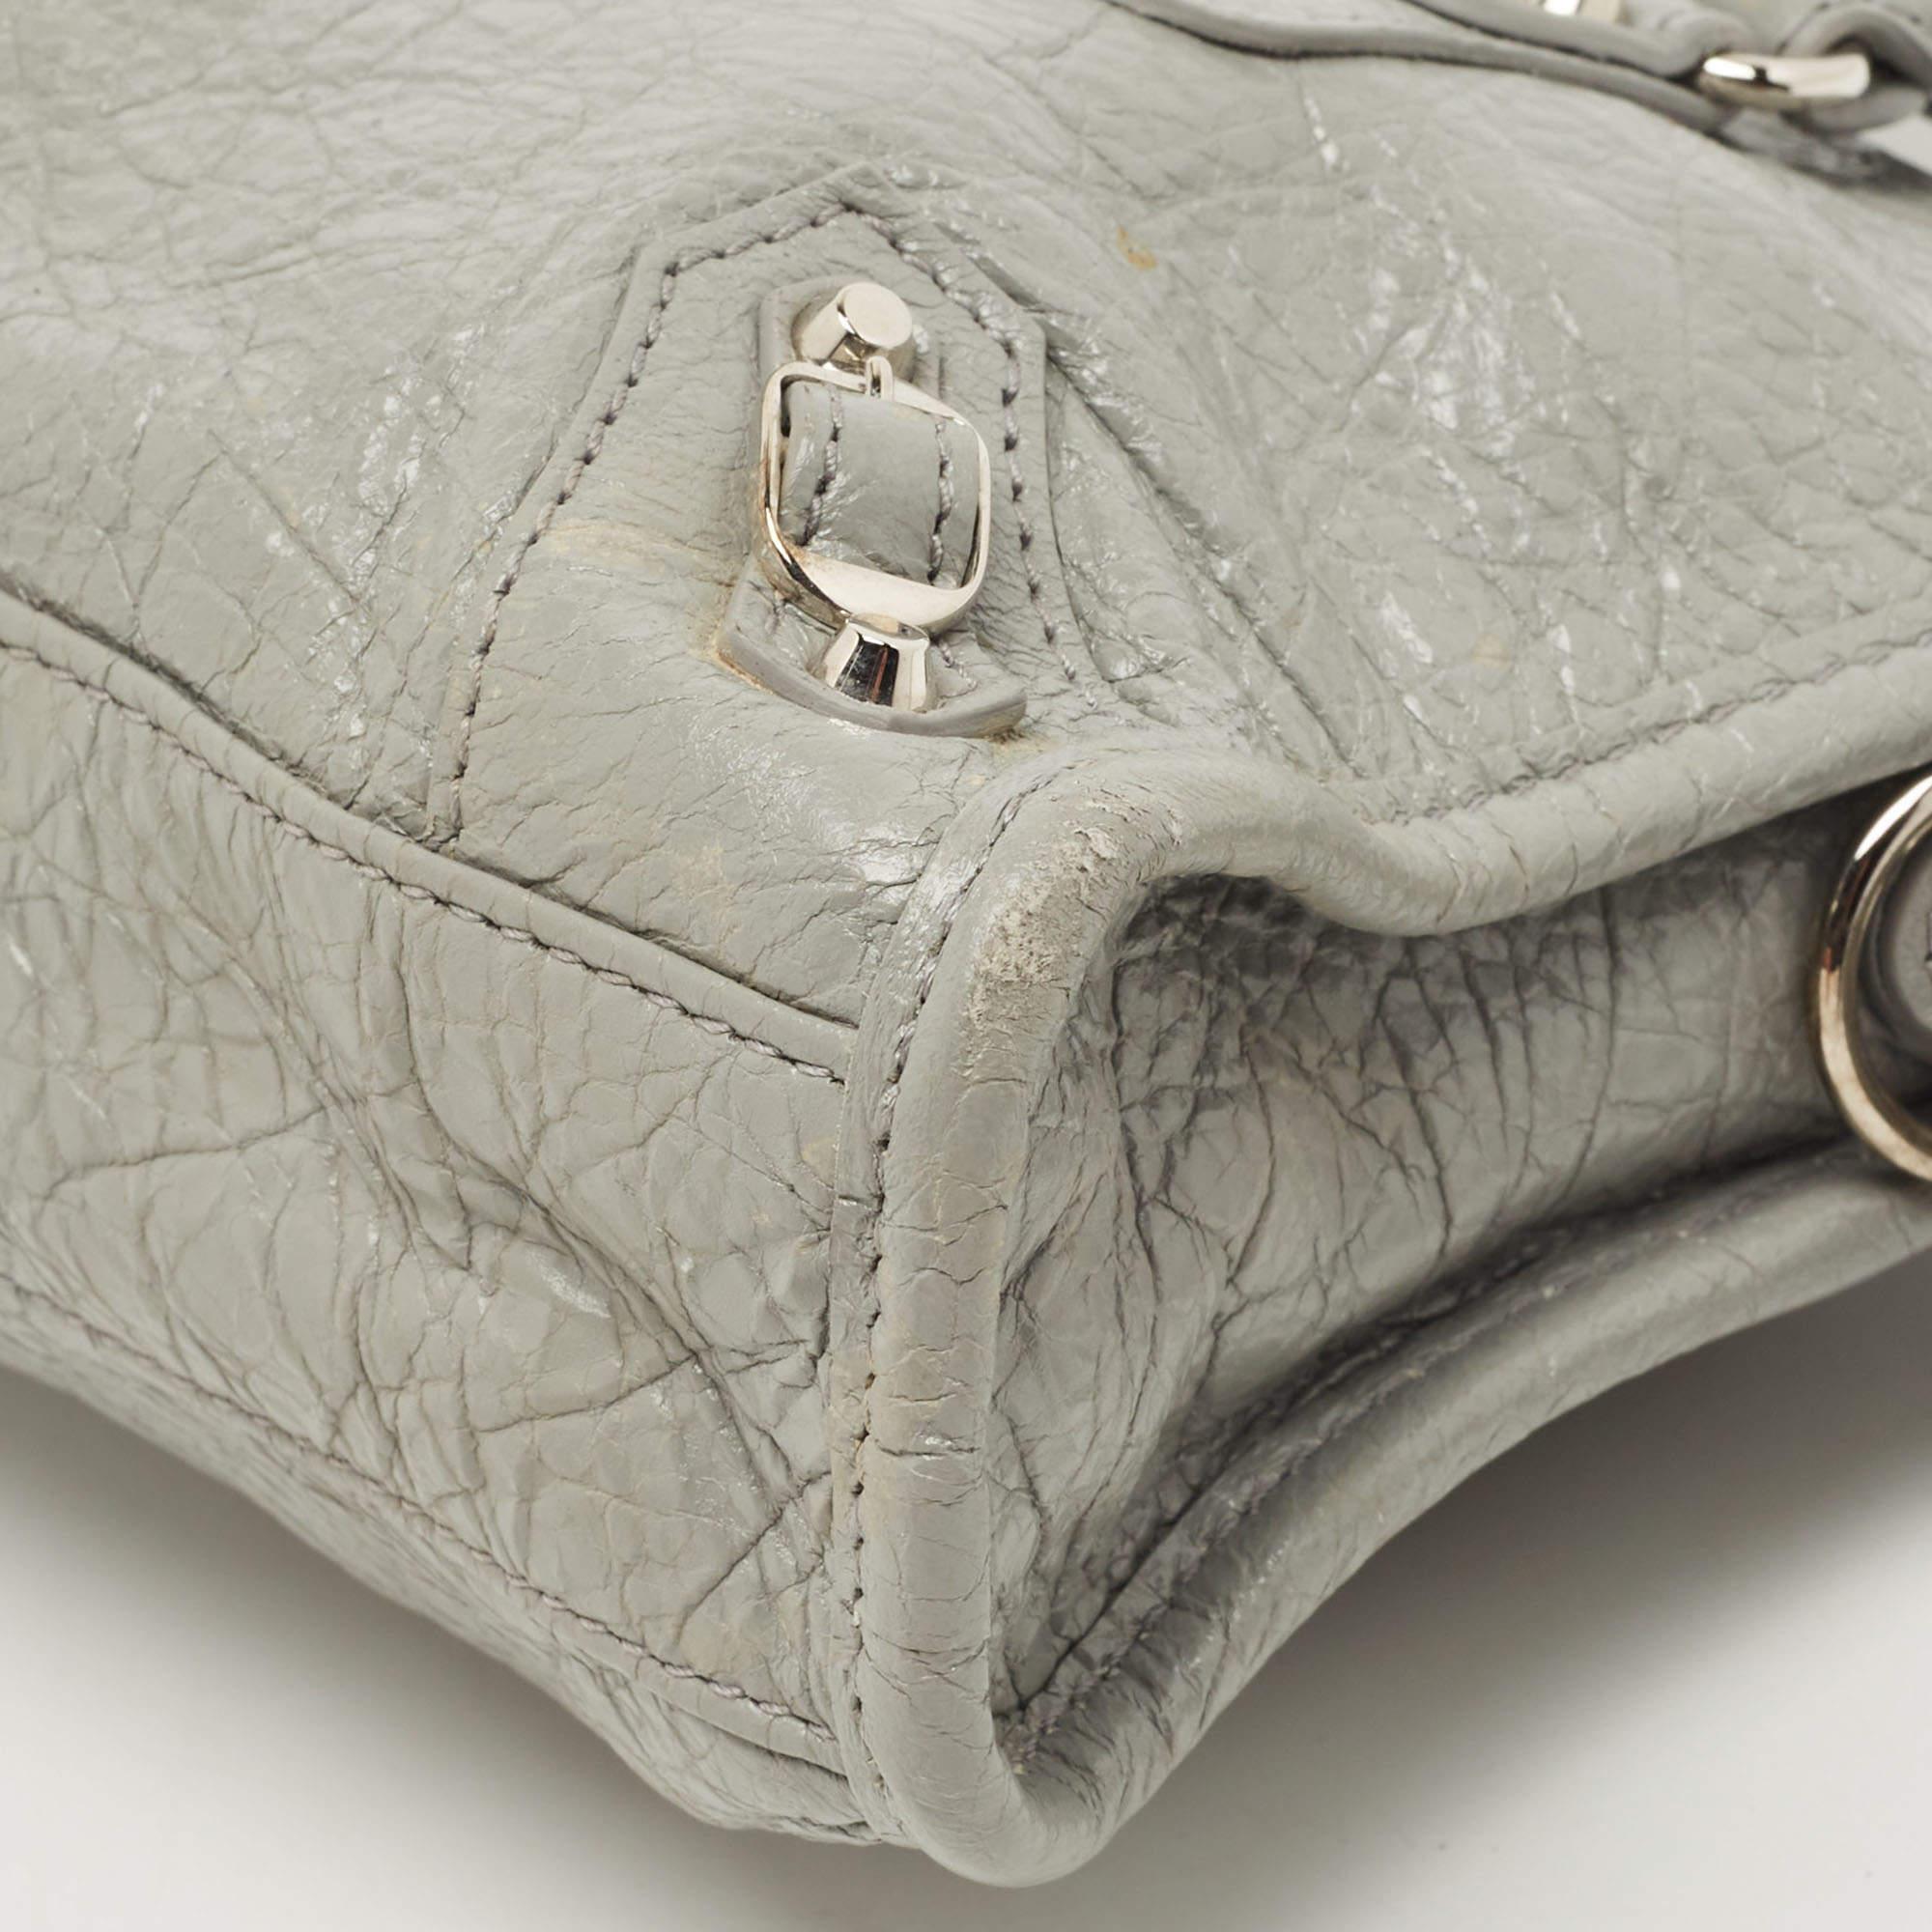 Presenting a stylish leather bag to own this season and the ones after. It has a grey exterior and a fabric-lined interior for all your essentials. A must-have in your collection, this bag from Balenciaga will represent your fabulous fashion